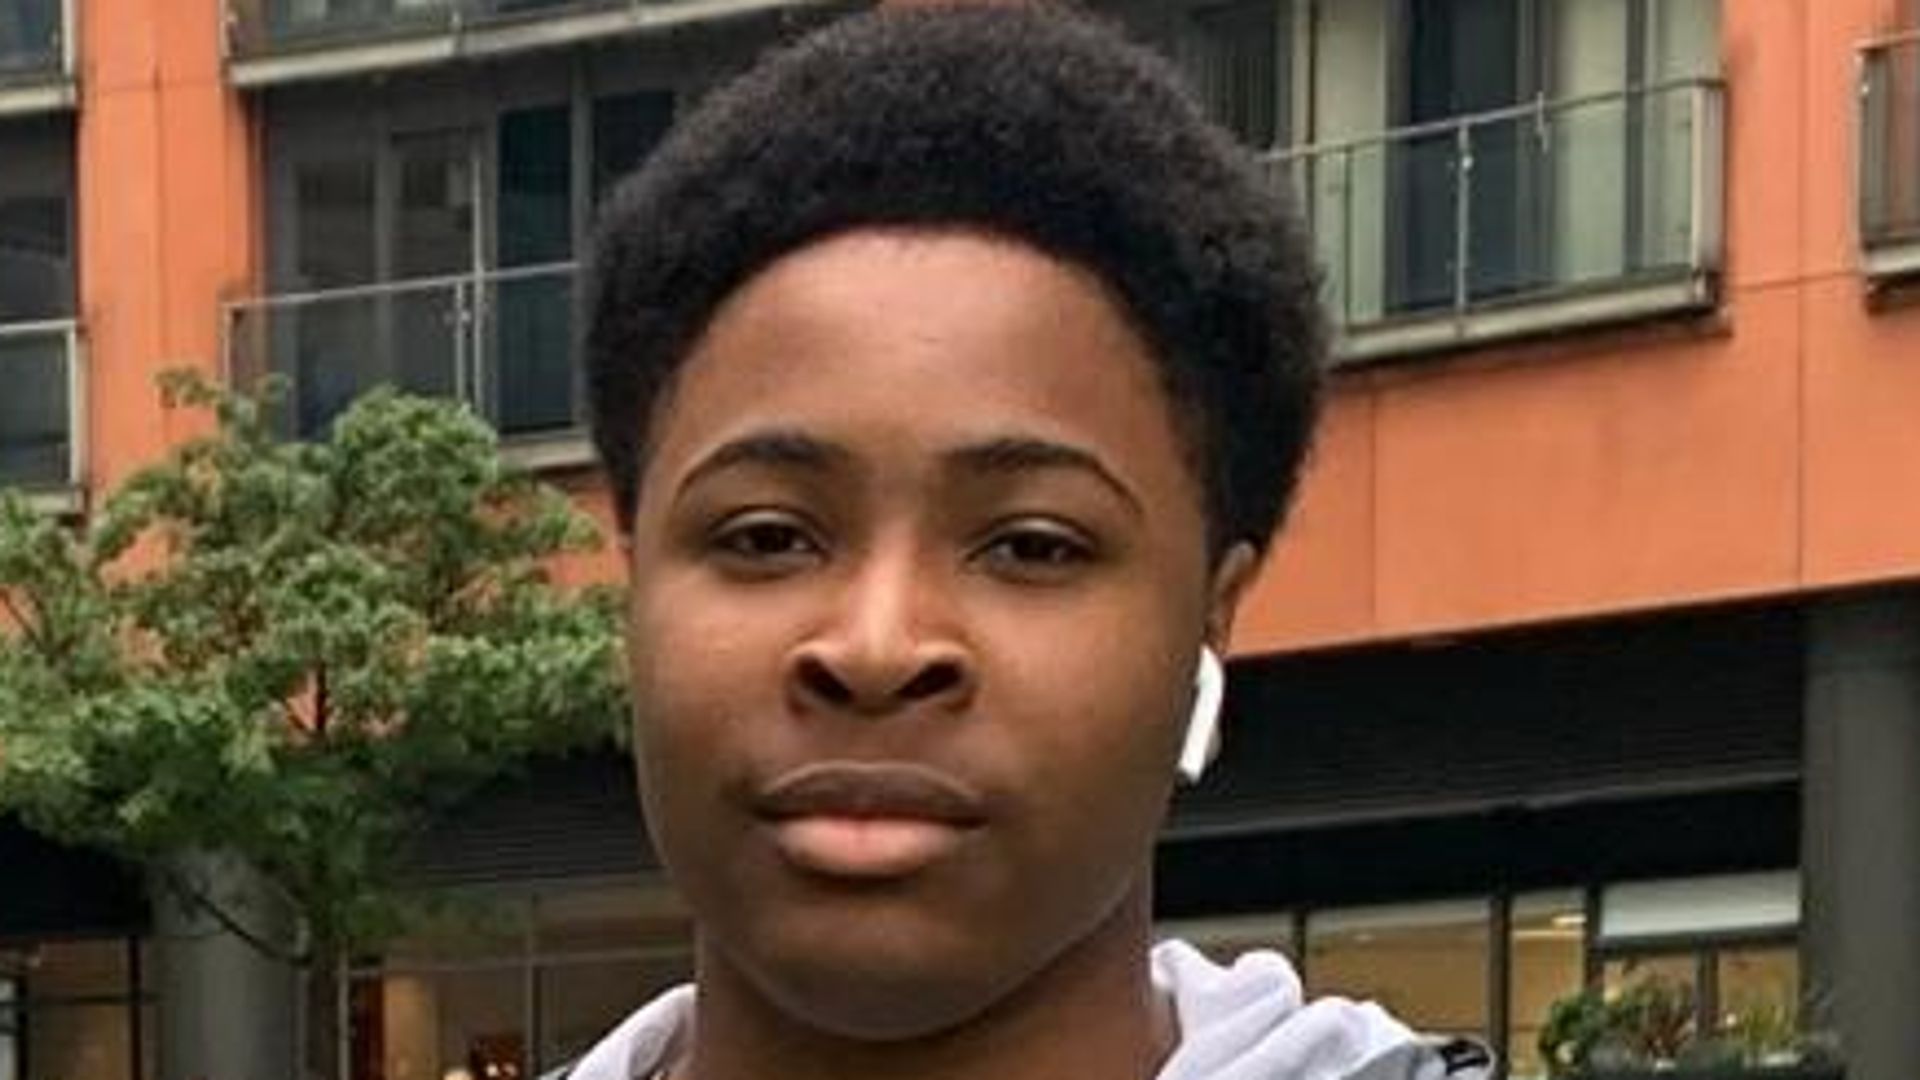 Boy, 15, shot dead during 'family fun day' is named